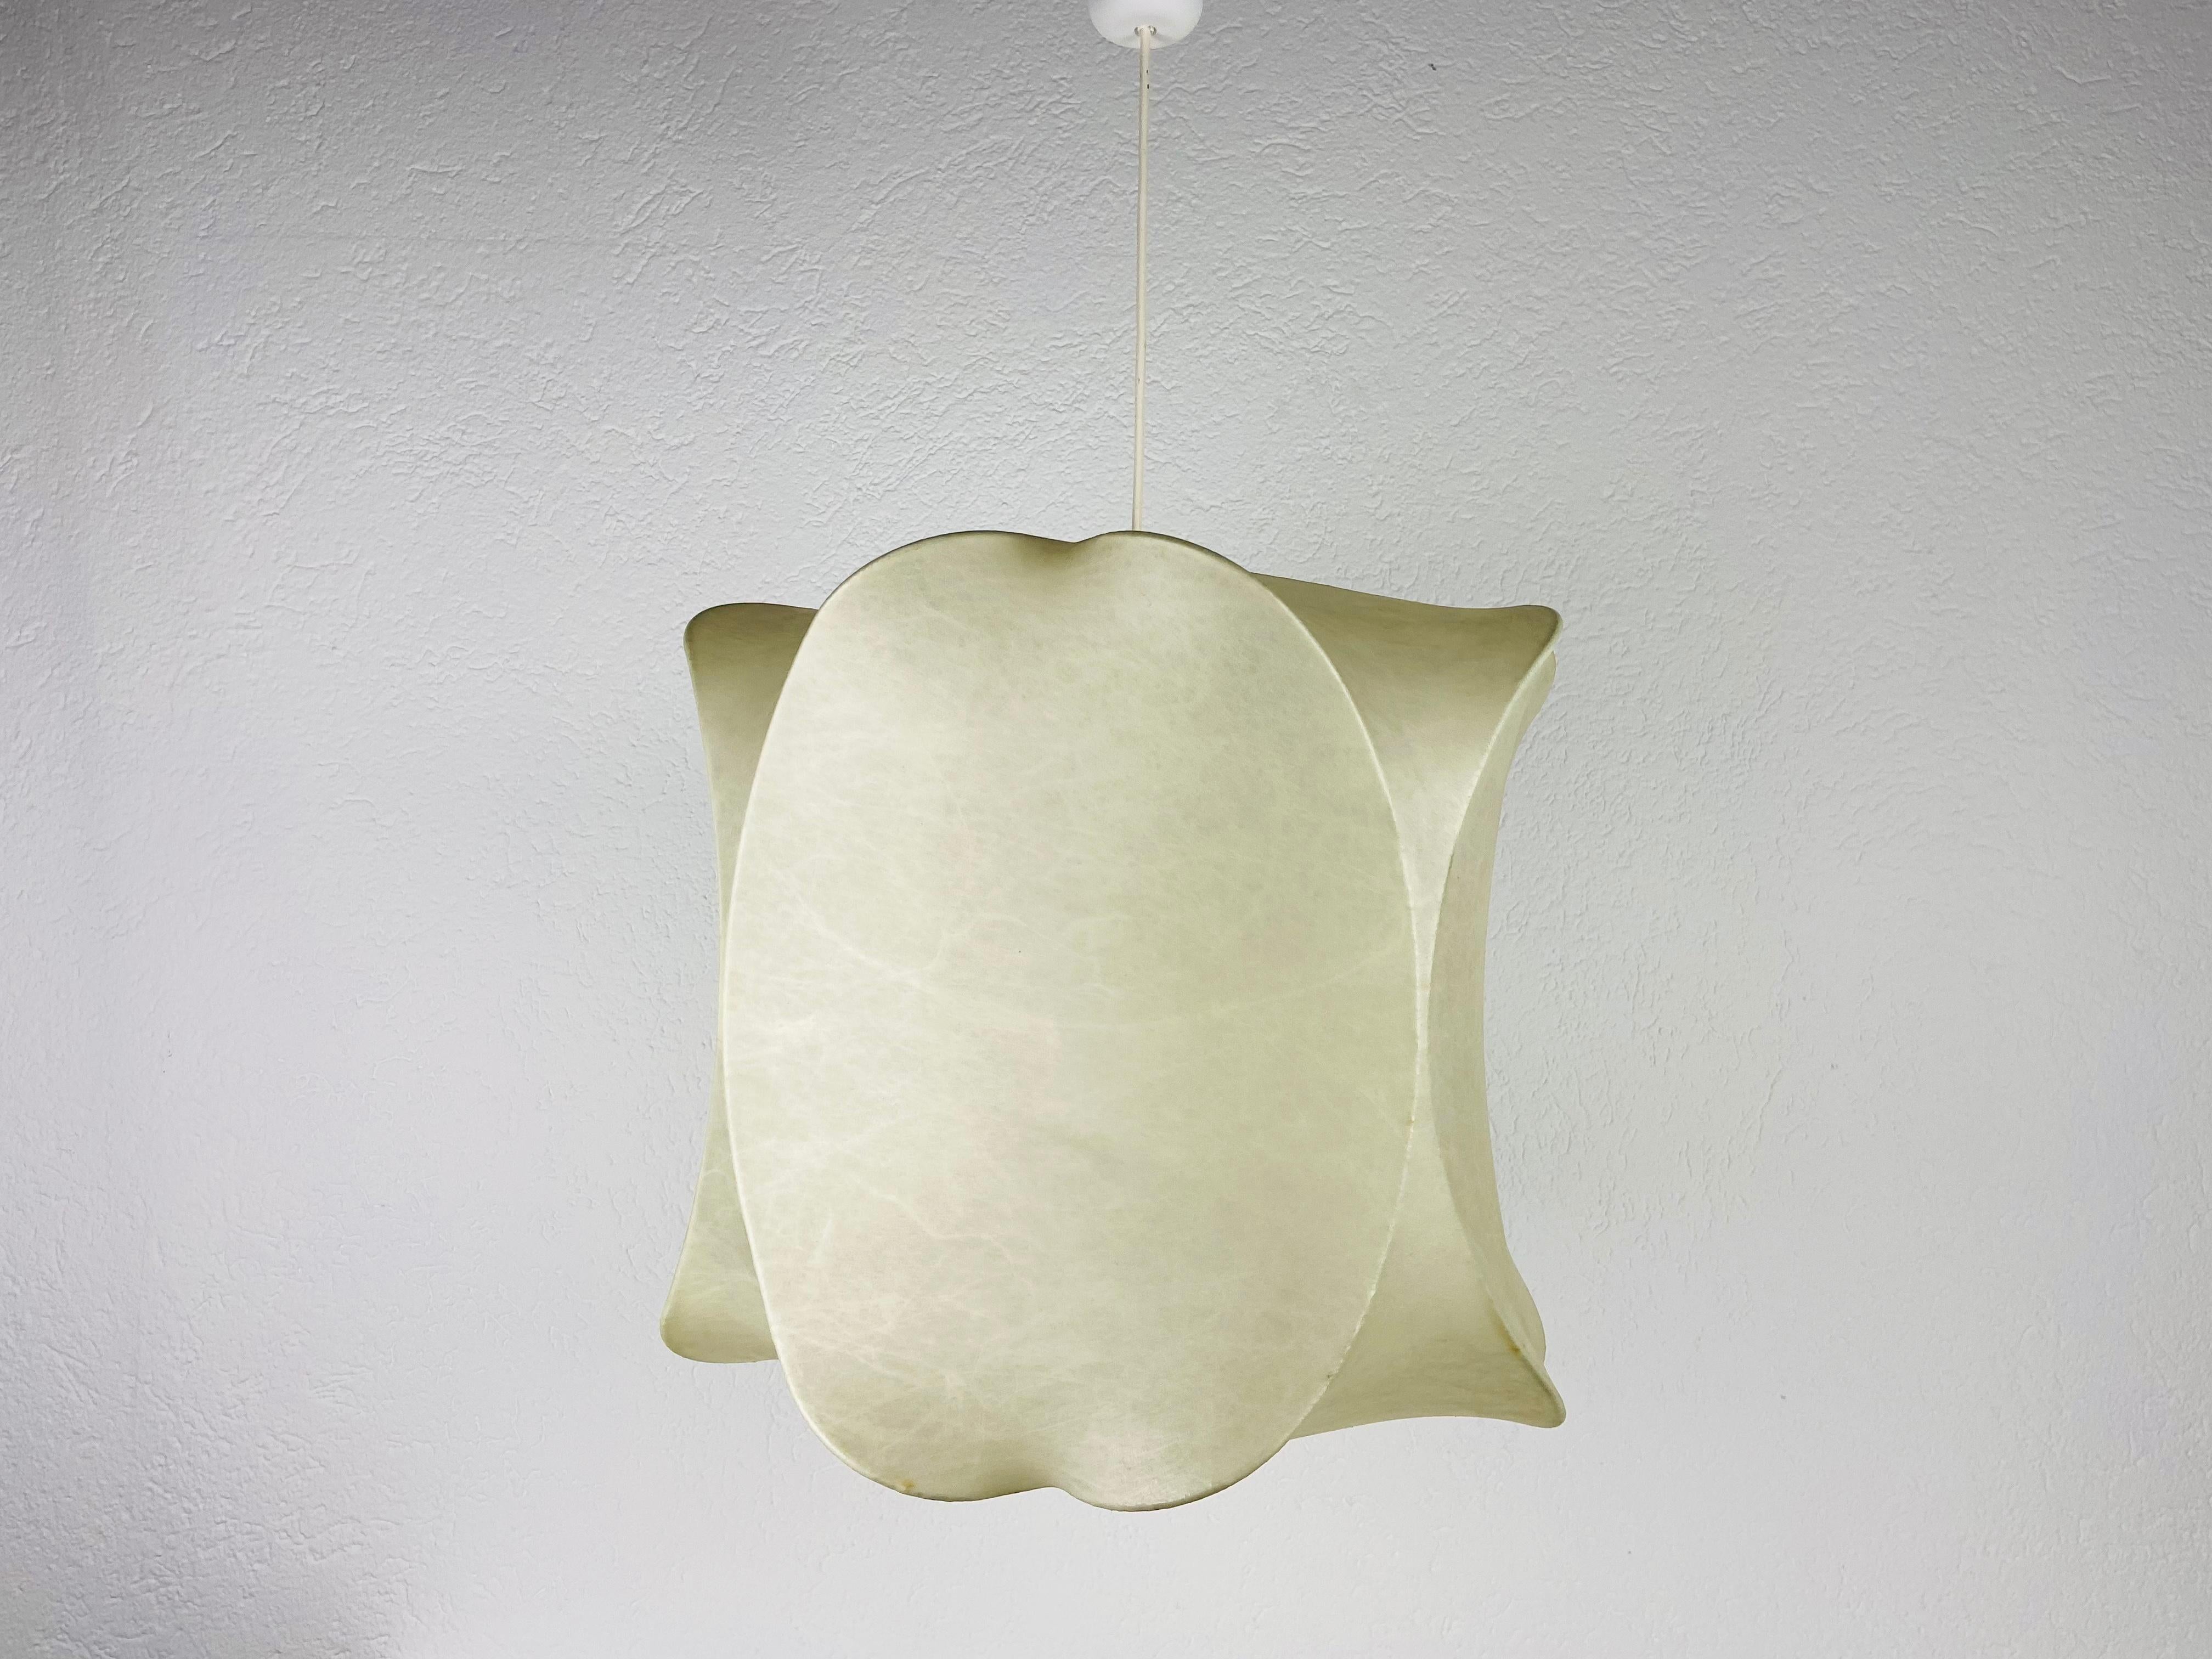 Synthetic Midcentury Cocoon Pendant Light, 1960s, Italy